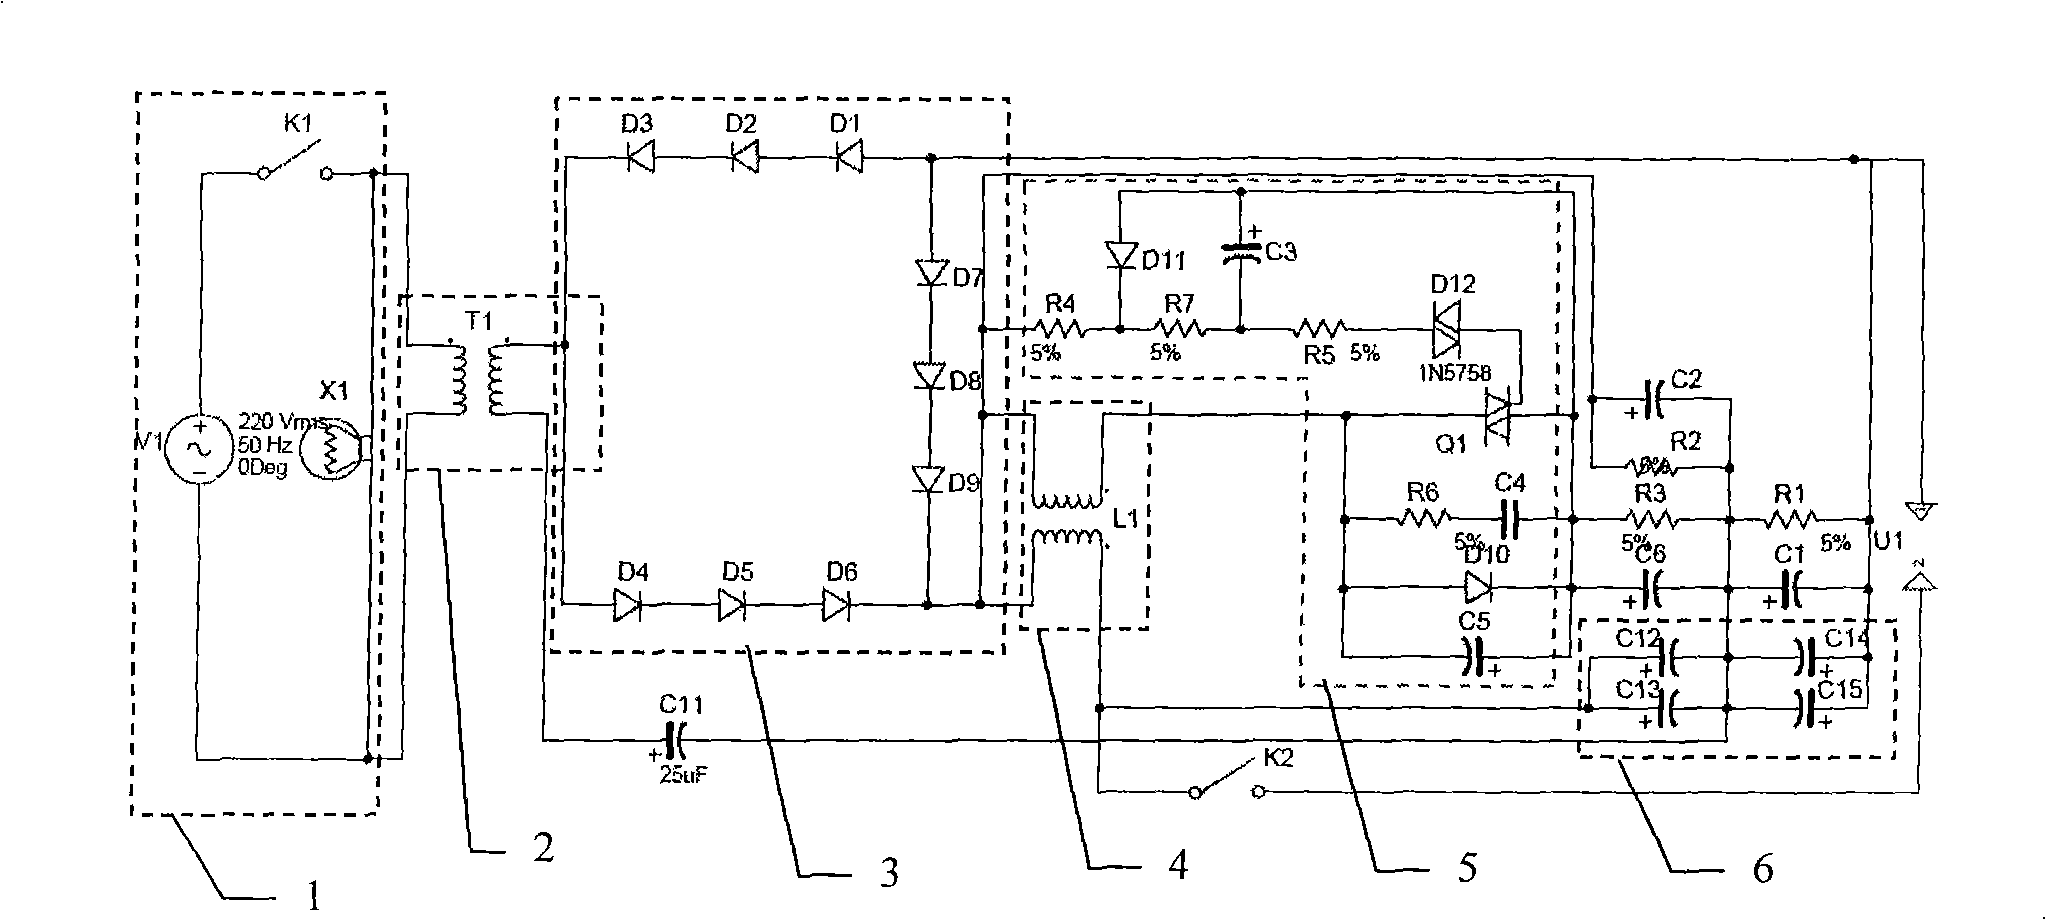 High energy electronic ignition system for high pressure gas well